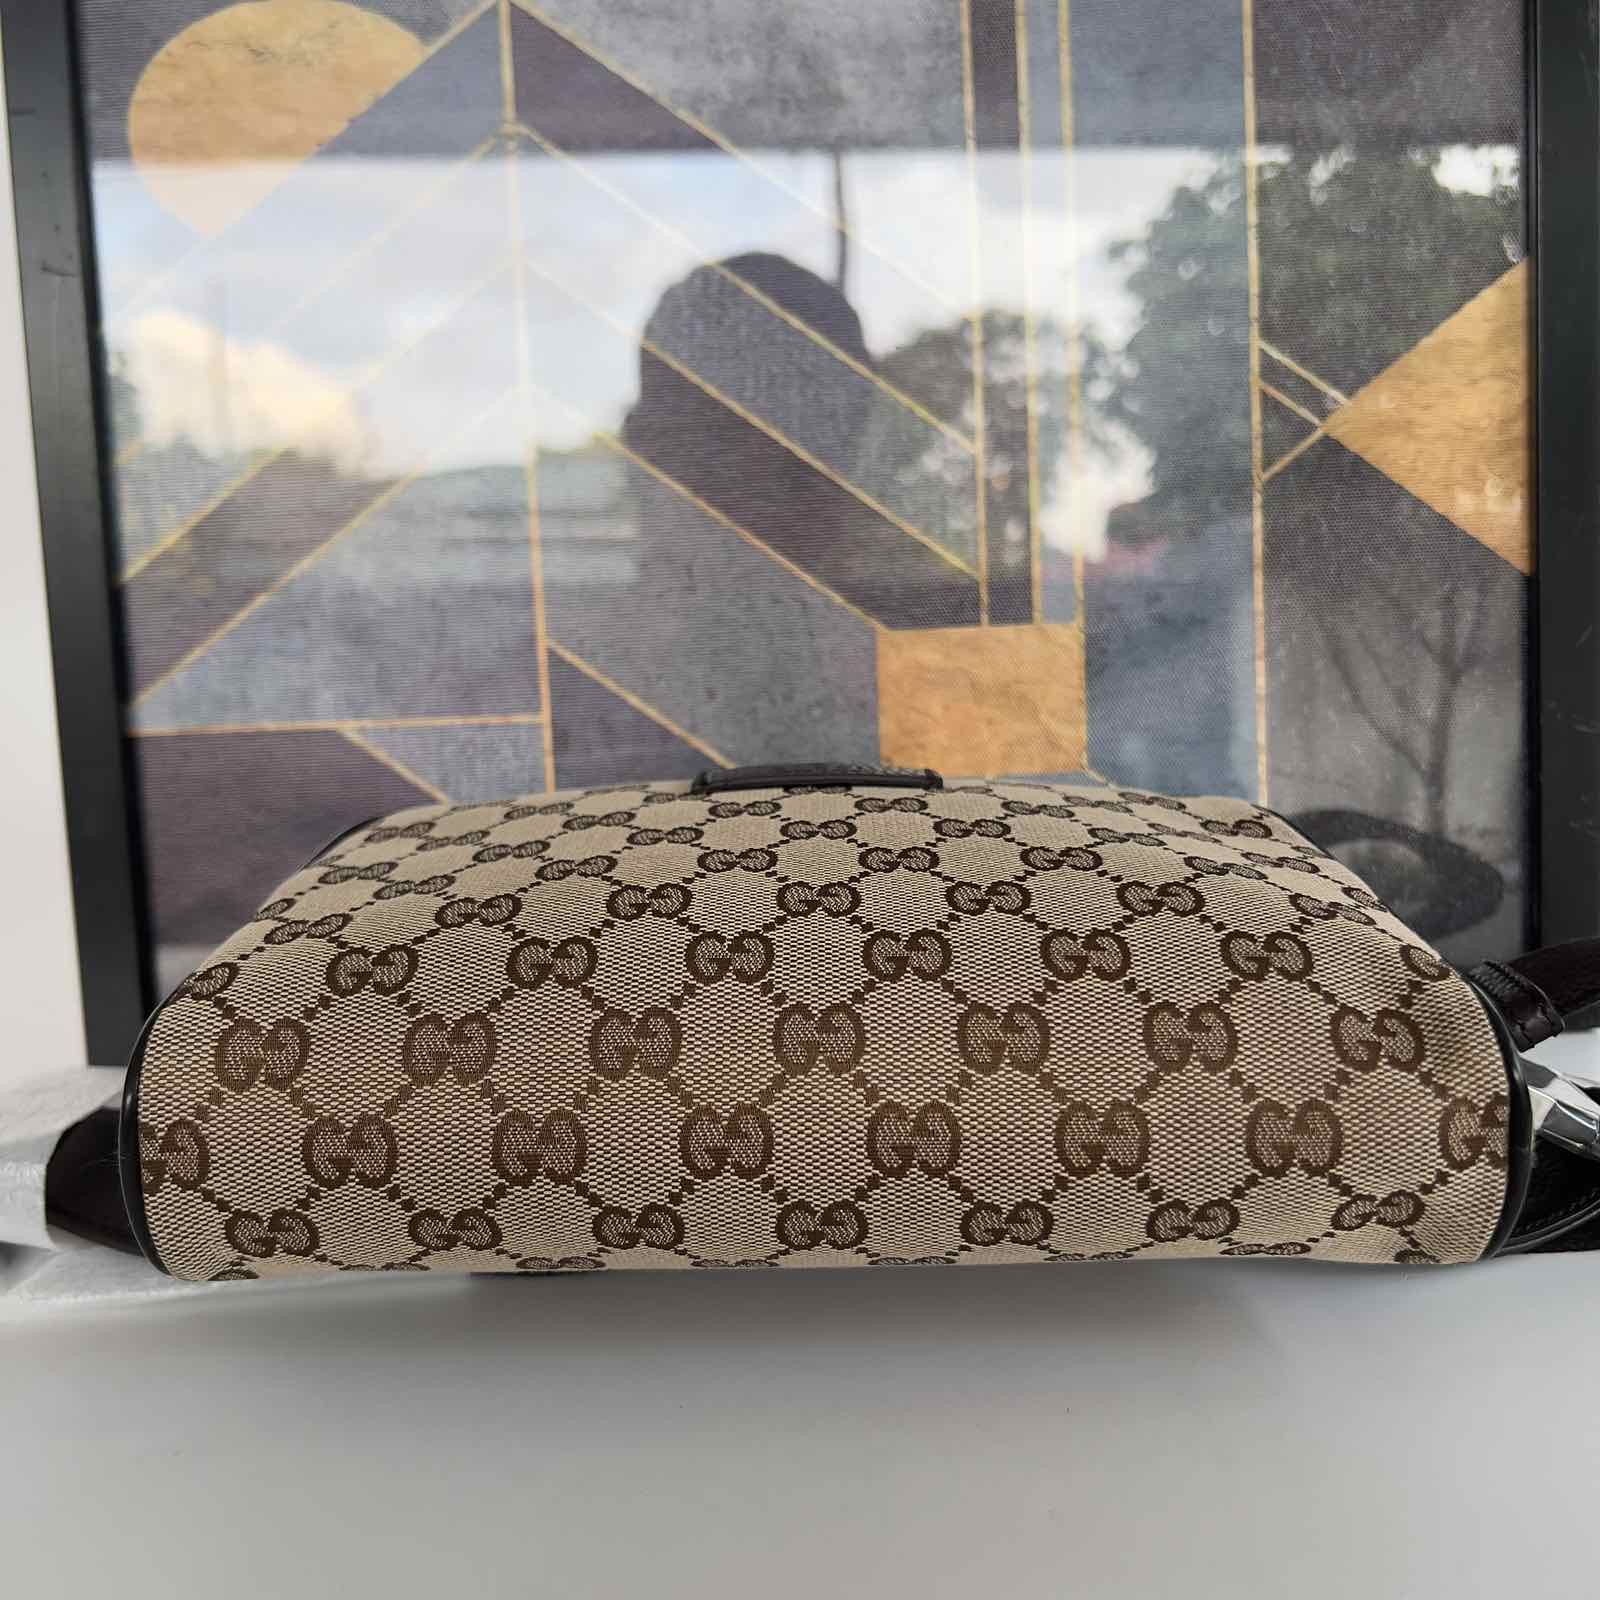 Gucci Monogram Canvas Belt/Waist Bag. Made in Italy. With care card &  dustbag ❤️